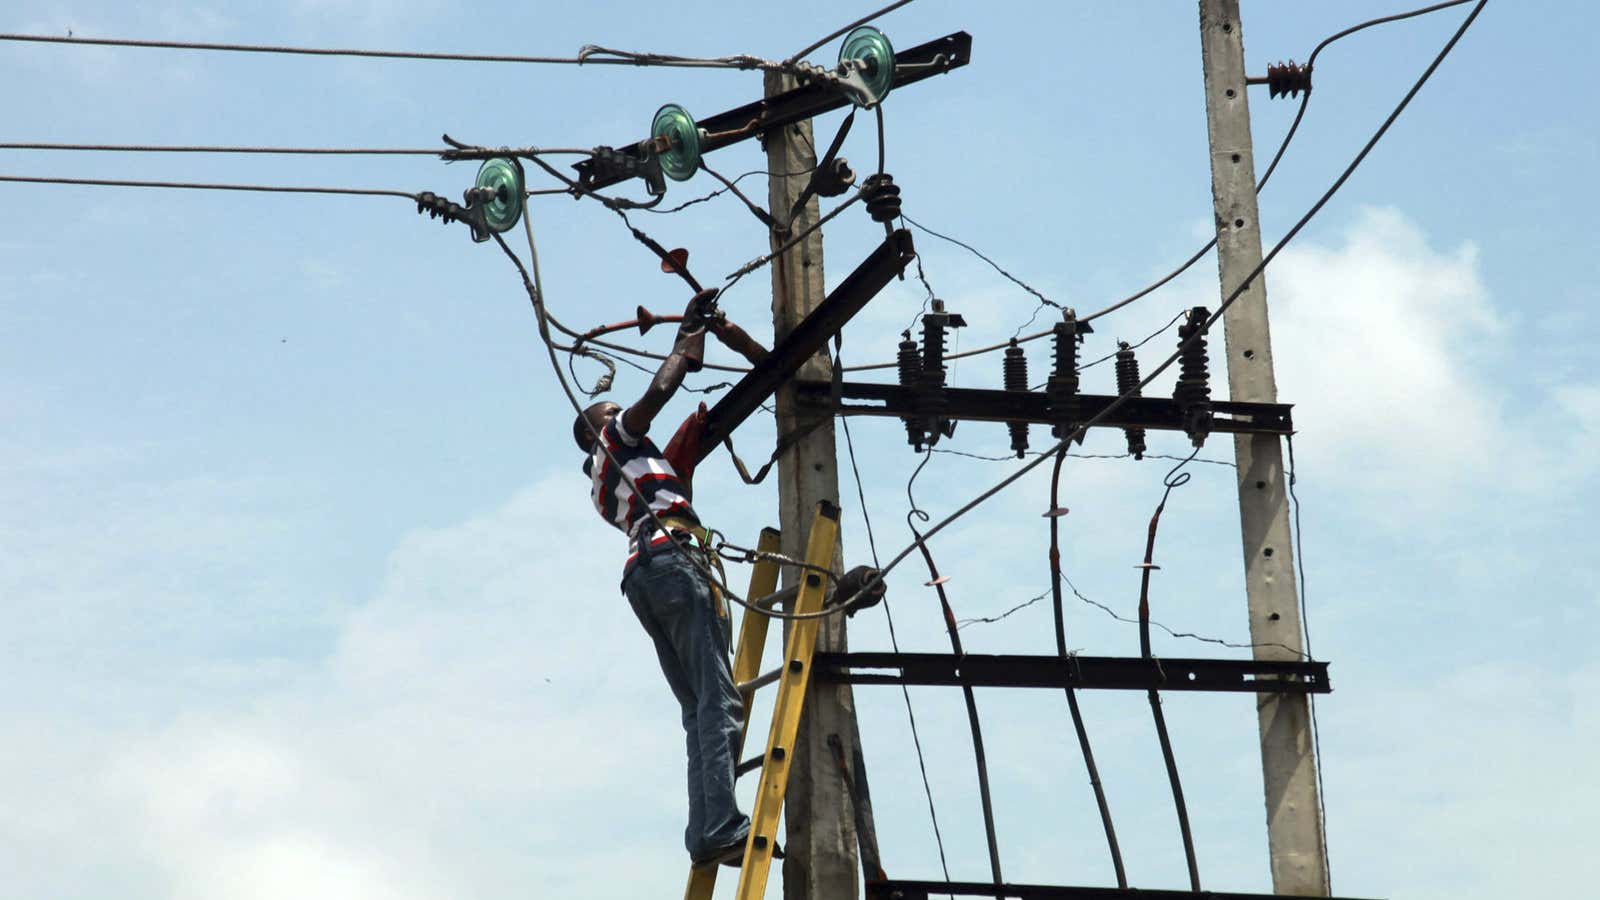 In Africa, being connected to electricity grids is not a guarantee of power supply.